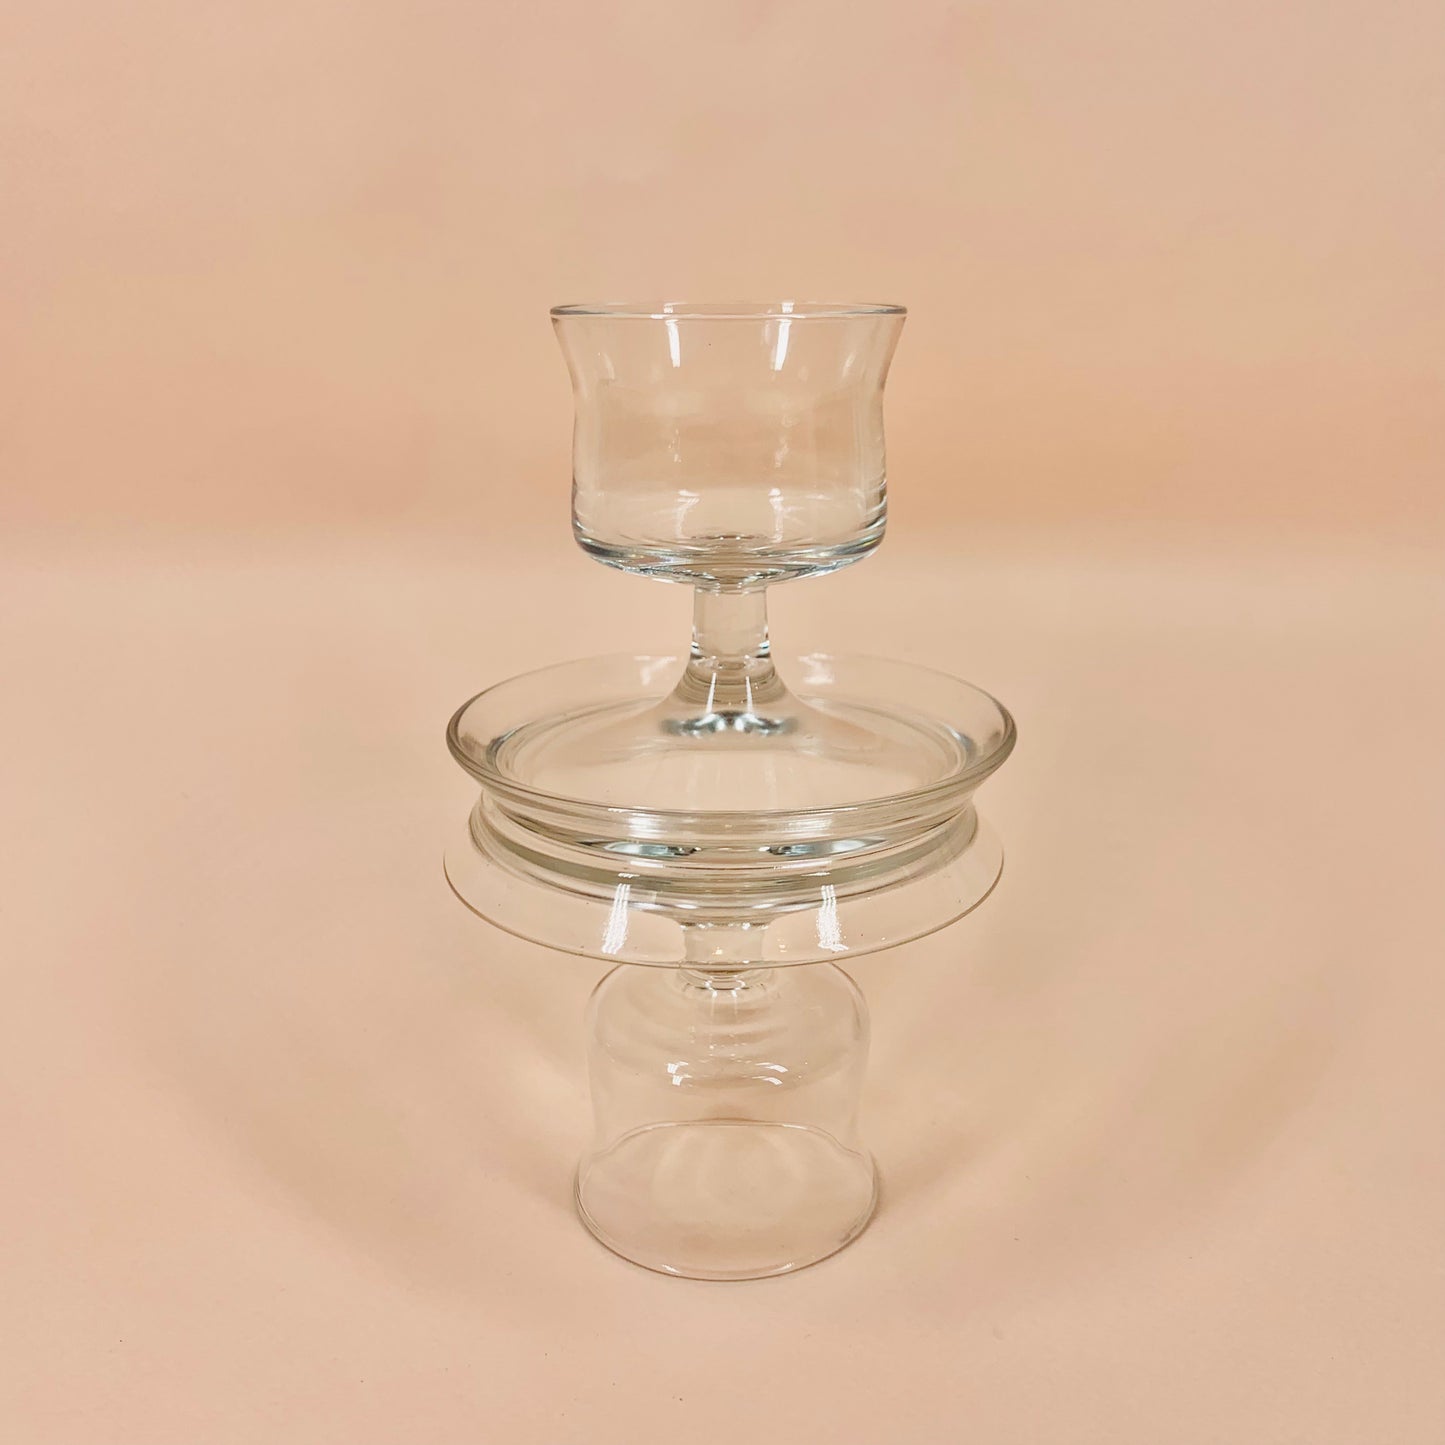 Vintage Scandinavian glass candle holders with catchment base